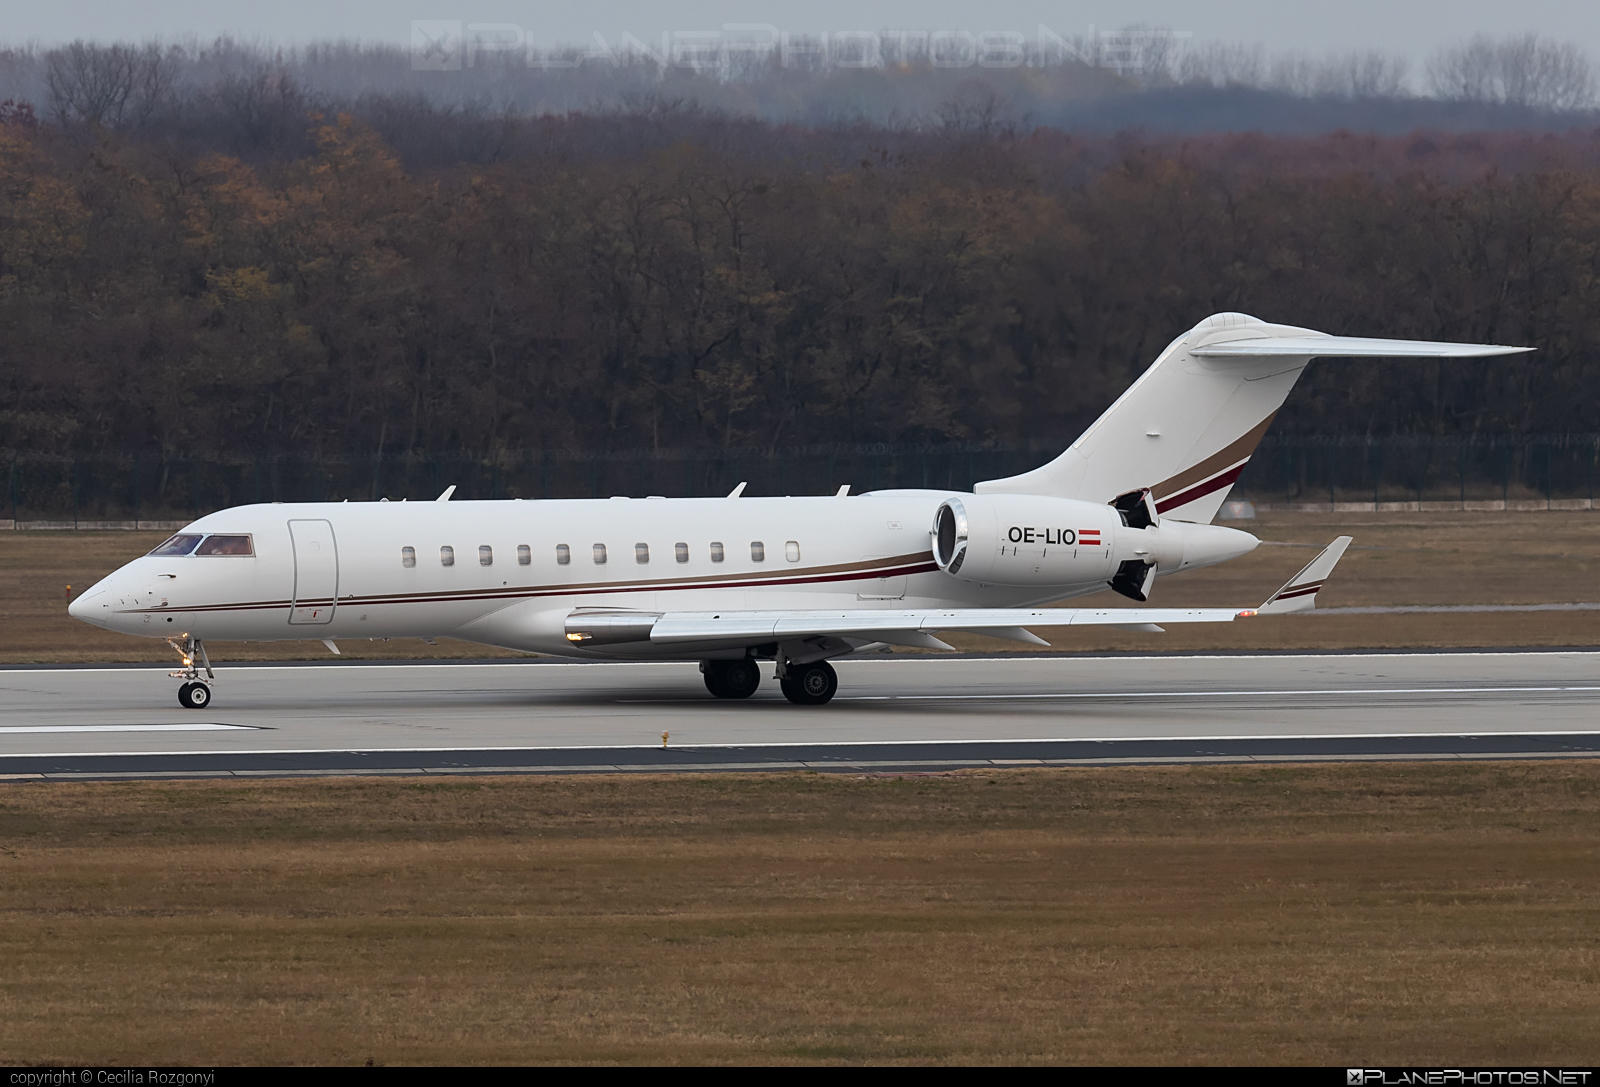 Bombardier Global 5000 (BD-700-1A11) - OE-LIO operated by Avcon Jet #avconjet #bd7001a11 #bombardier #bombardierGlobal #bombardierGlobal5000 #global5000